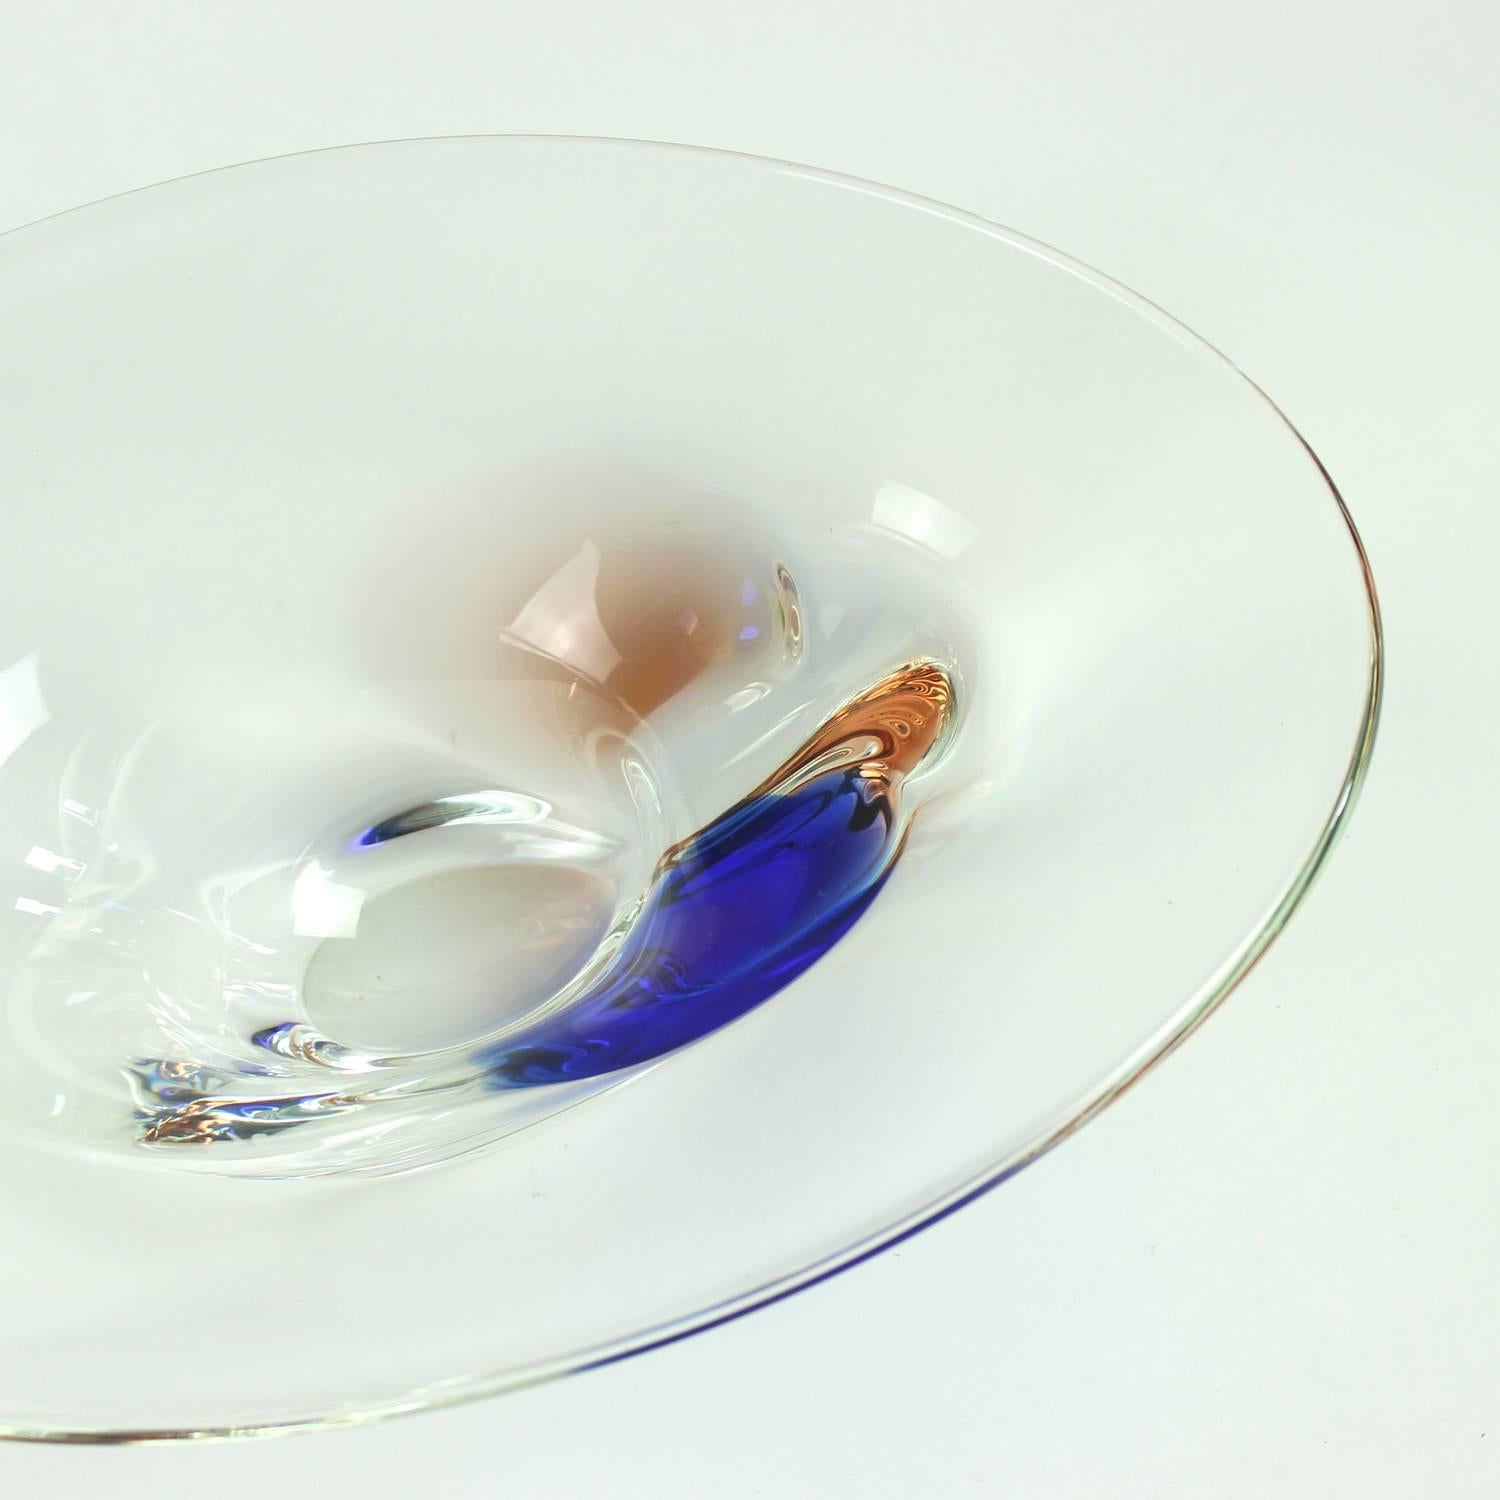 Beautiful and elegant item. Art glass bowl of metallurgical glass, manufactured by Borocrystal in 1960s. Unique design, so typical for the Czech glass making tradition. Made of clear glass with details of rosé and cobalt blue glass. Very good